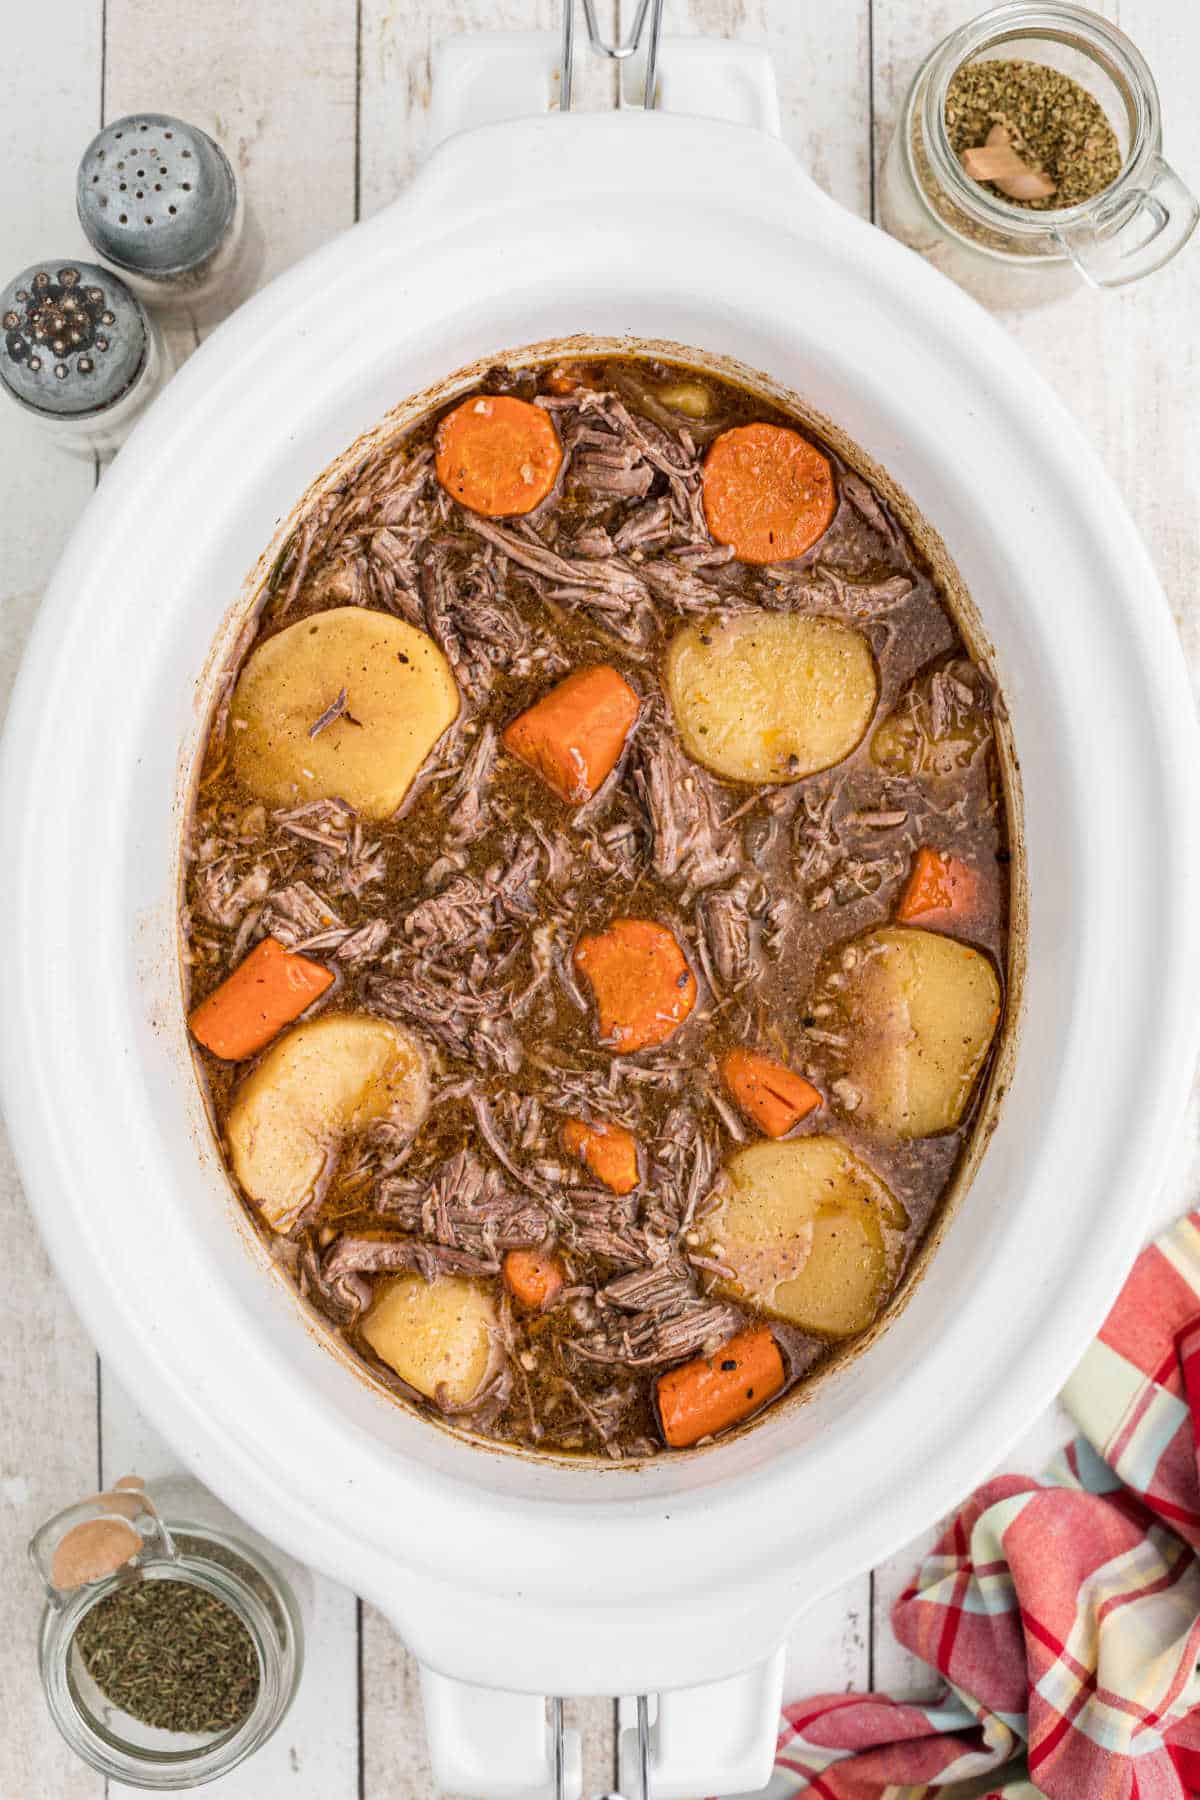 A white crock pot full of tri tip roast with carrots and potatoes.